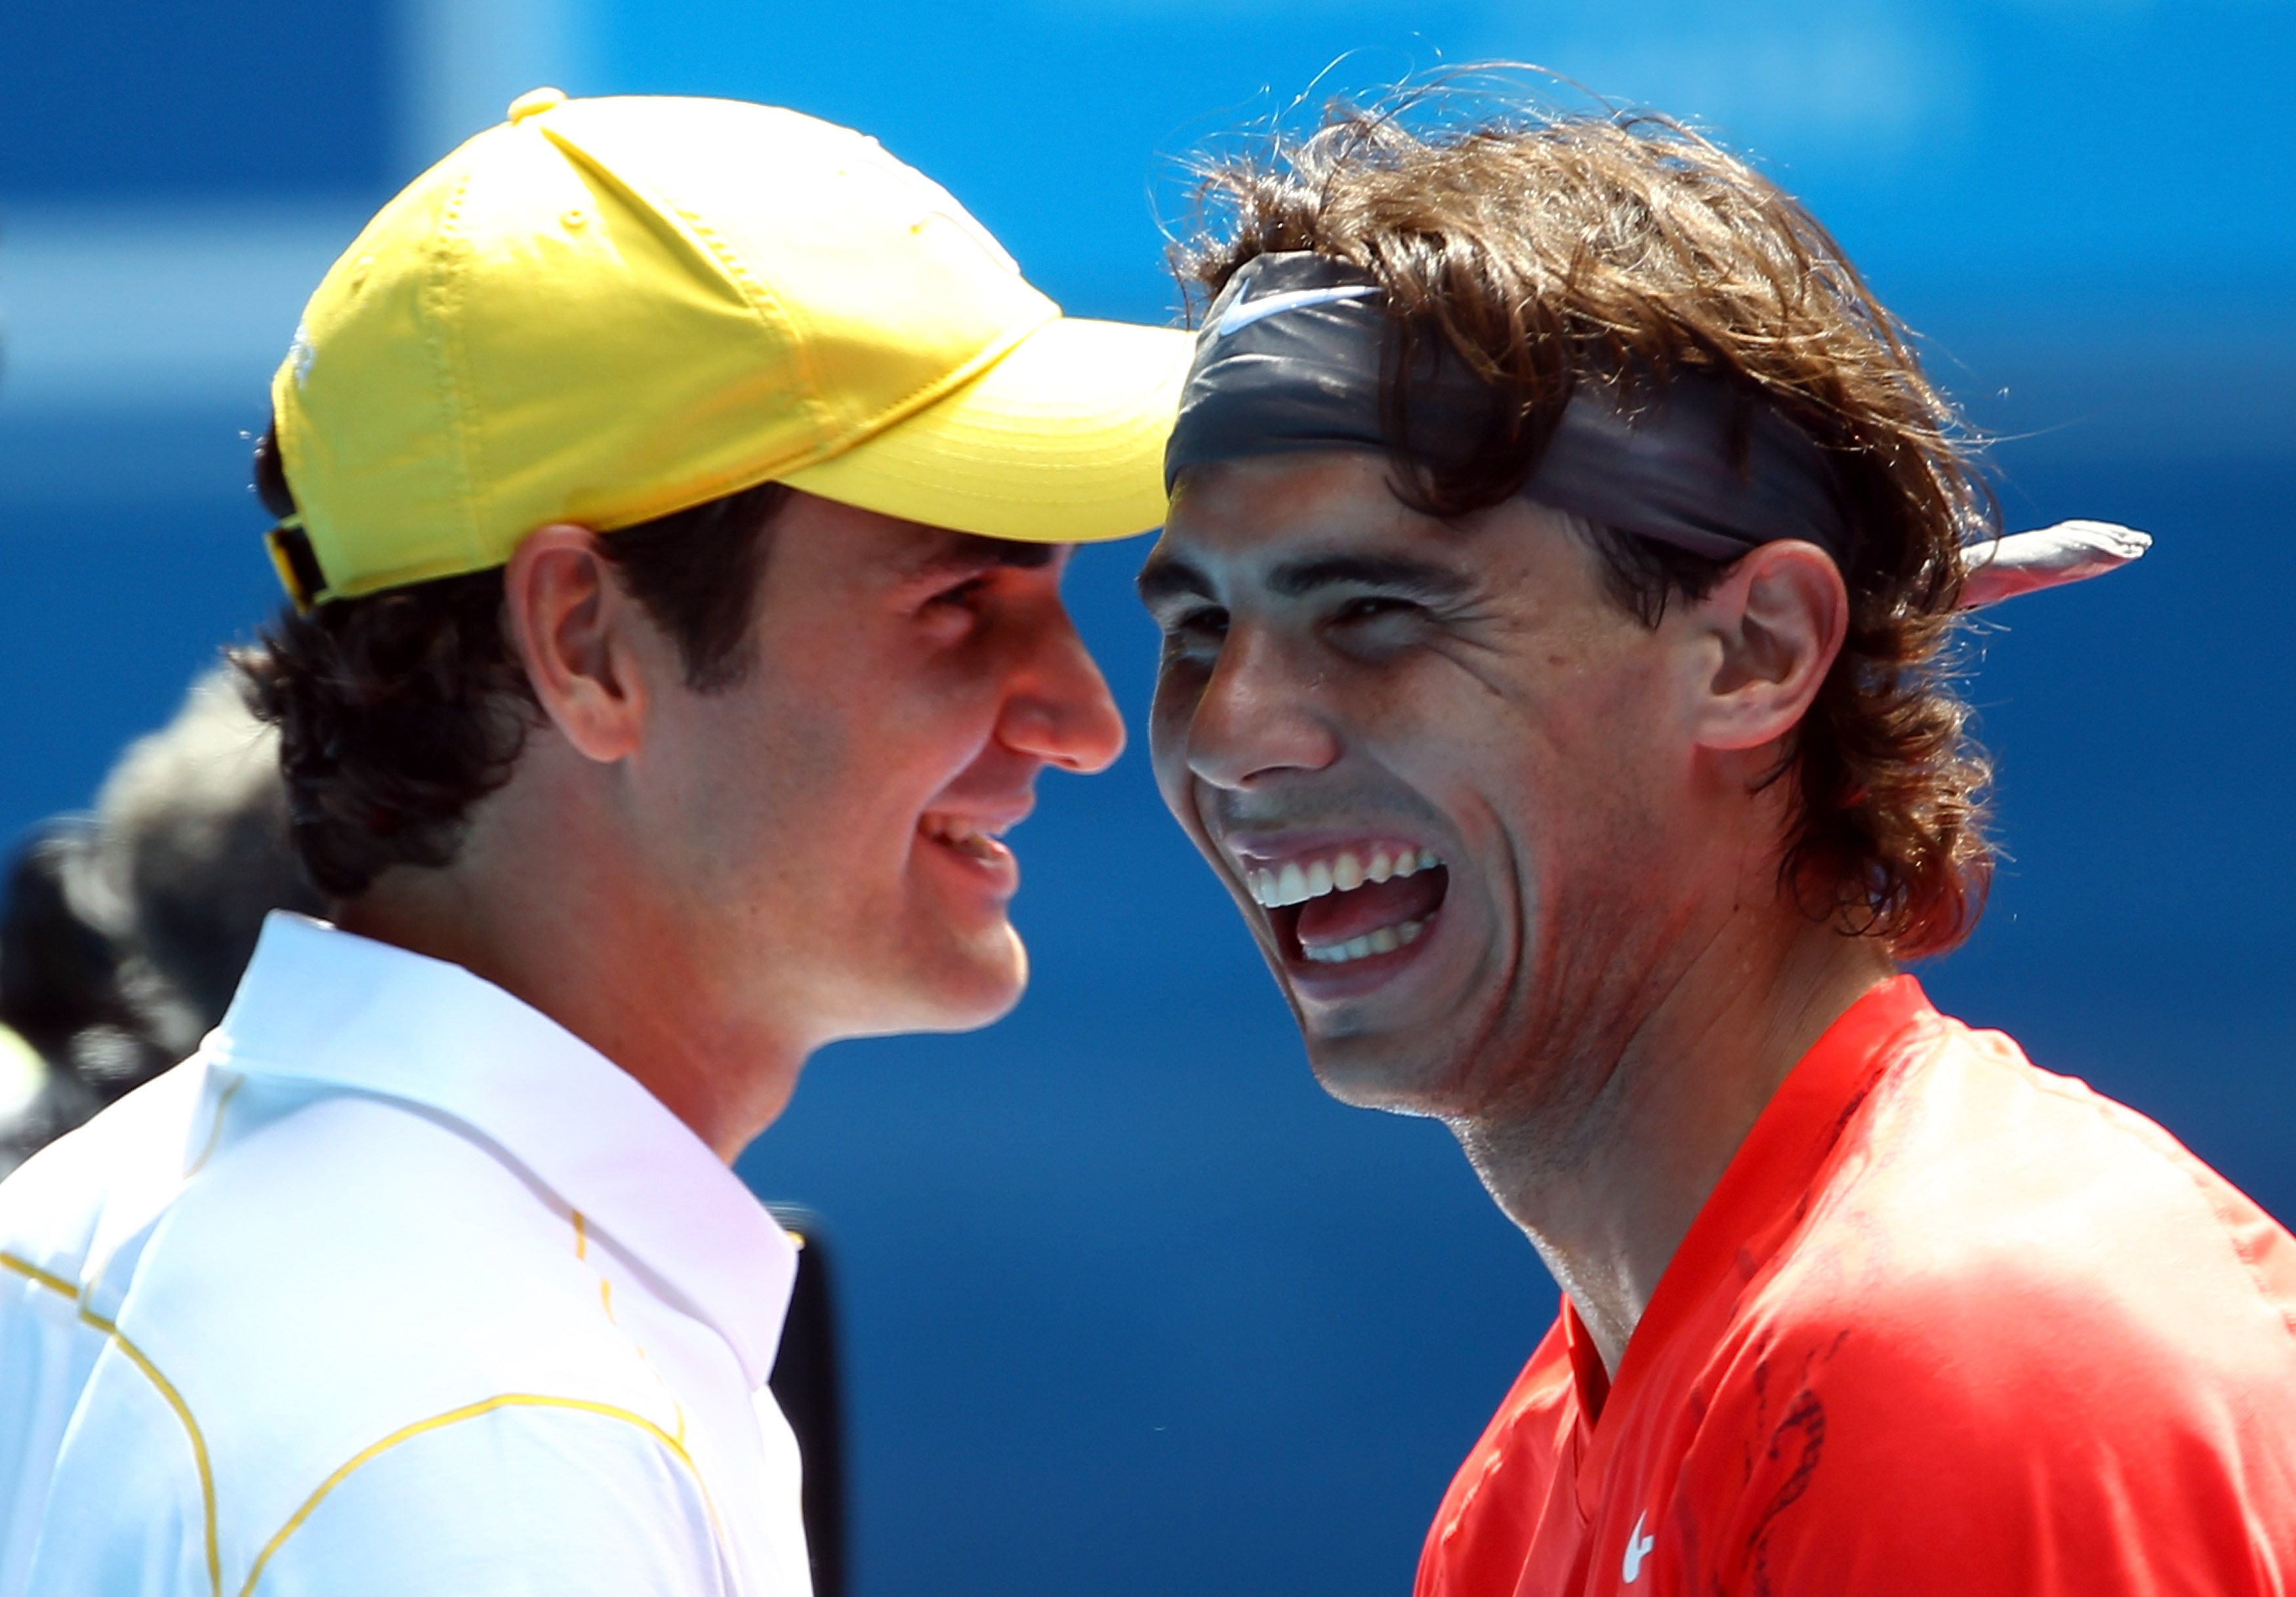 MELBOURNE, AUSTRALIA - JANUARY 16: Rafael Nadal of Spain and Roger Federer of Switzerland enjoy the day during the 'Rally For Relief' charity exhibition match ahead of the 2011 Australian Open at Melbourne Park on January 16, 2011 in Melbourne, Australia.